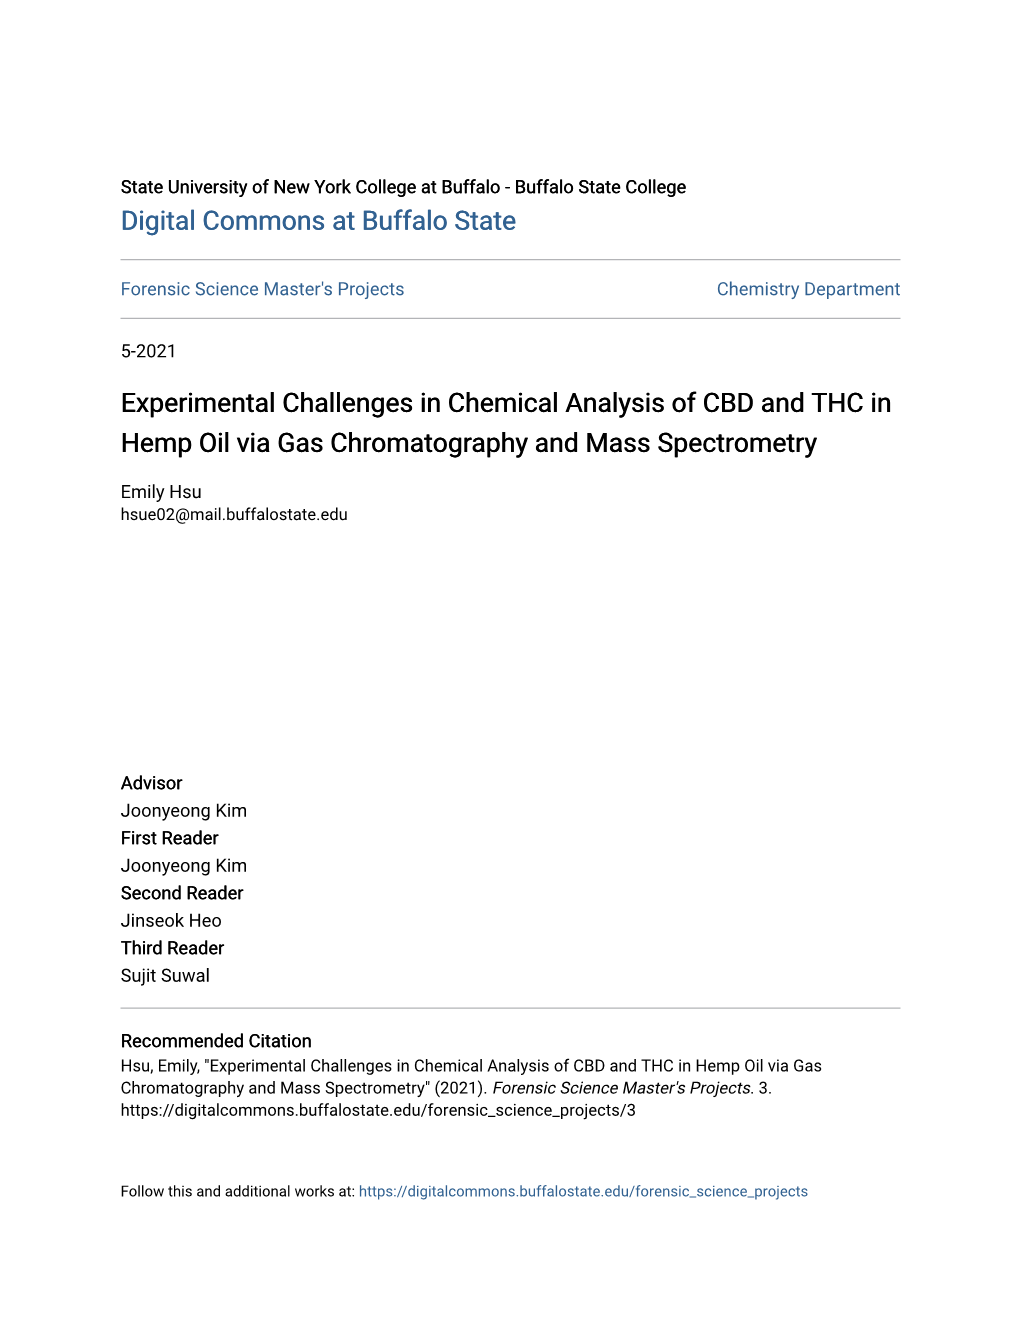 Experimental Challenges in Chemical Analysis of CBD and THC in Hemp Oil Via Gas Chromatography and Mass Spectrometry